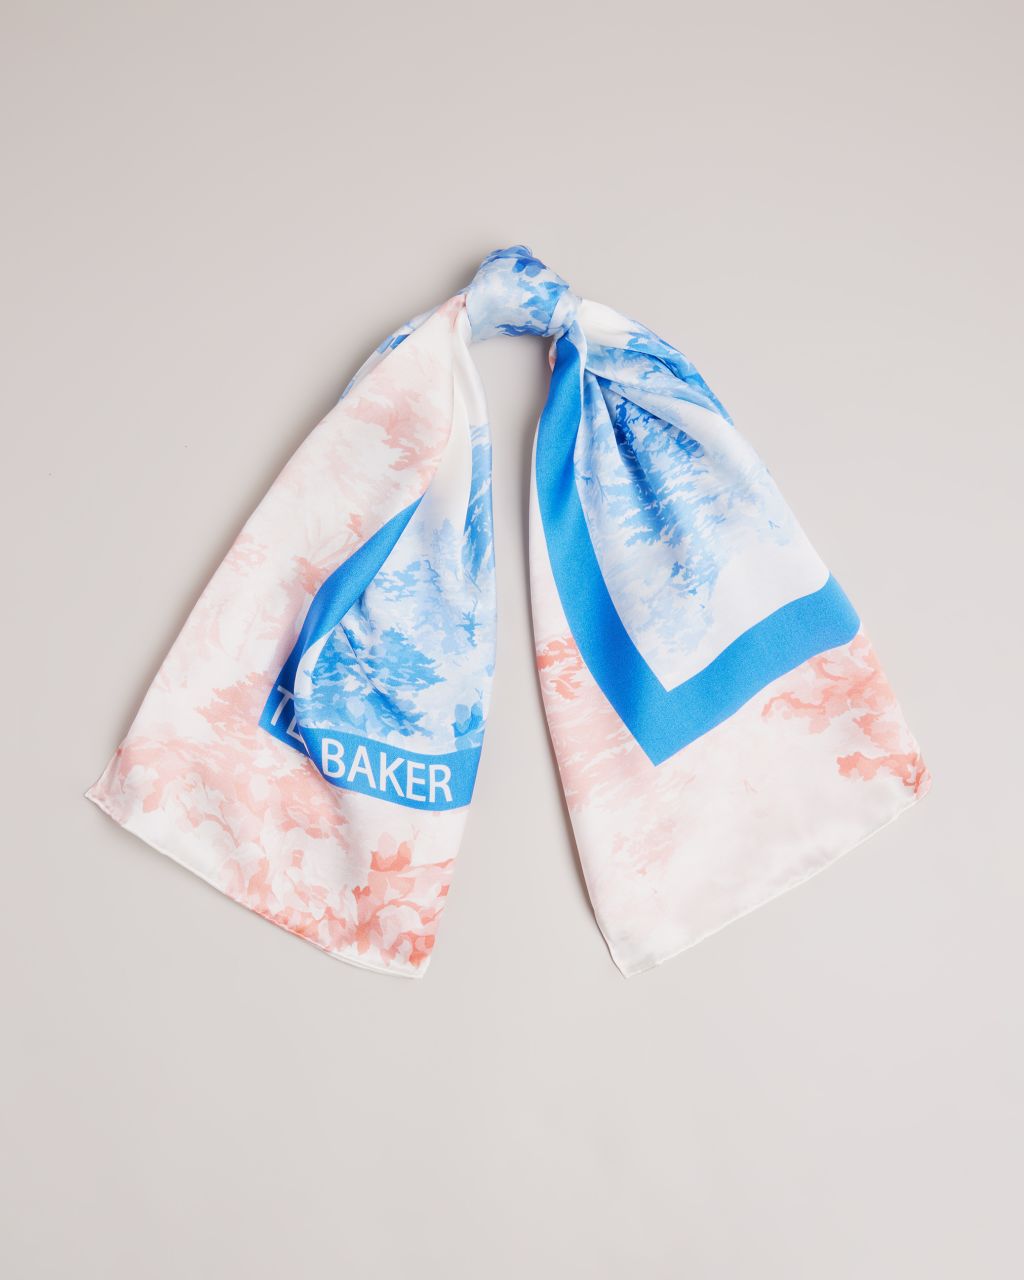 Ted Baker Women's New Romantic Printed Silk Square Scarf in Medium Blue, Shali